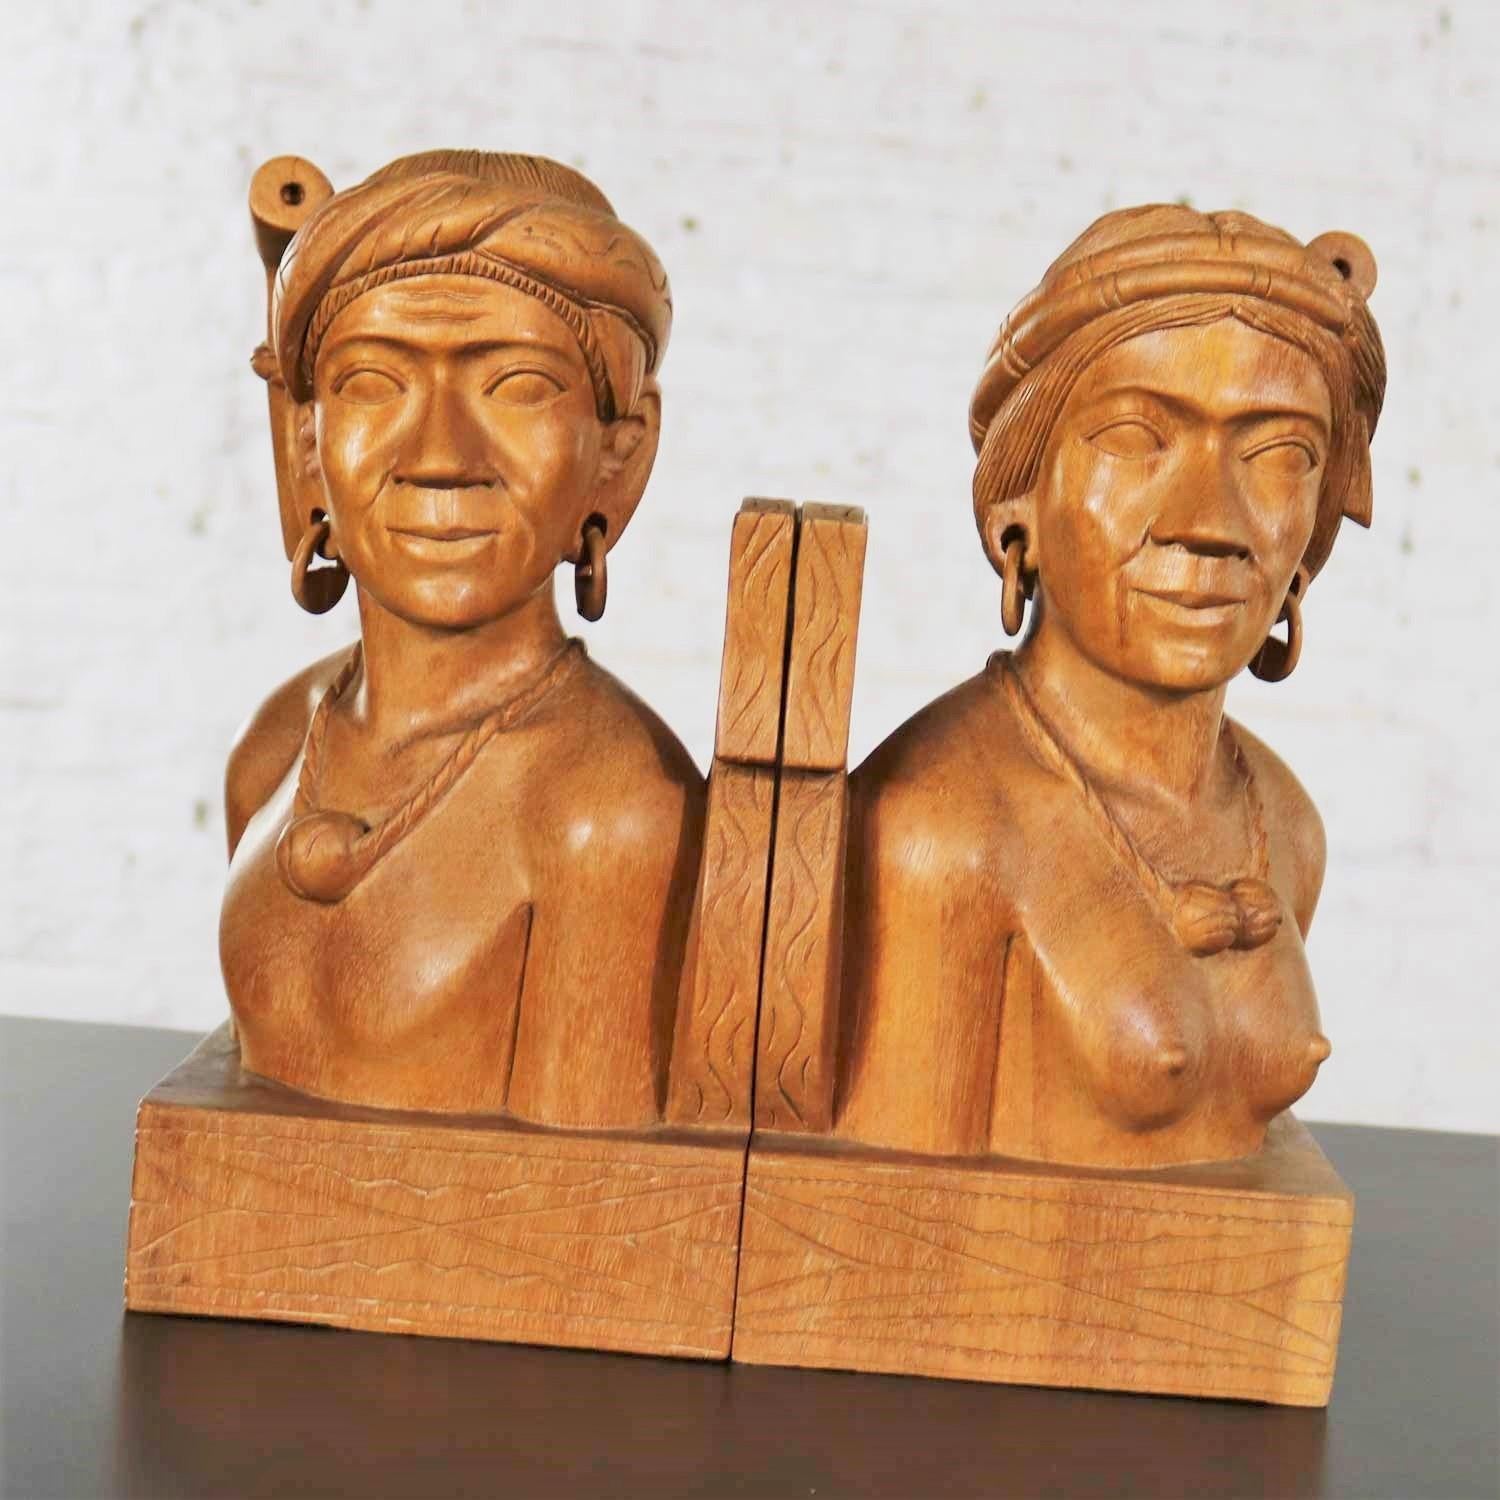 Handsome pair of hand carved wood tribal figural bookends. One male and one female. They are in fabulous vintage condition. Please see photos, circa mid-20th century.

Calling all bibliophiles! Looking for a grand pair of bookends to support your